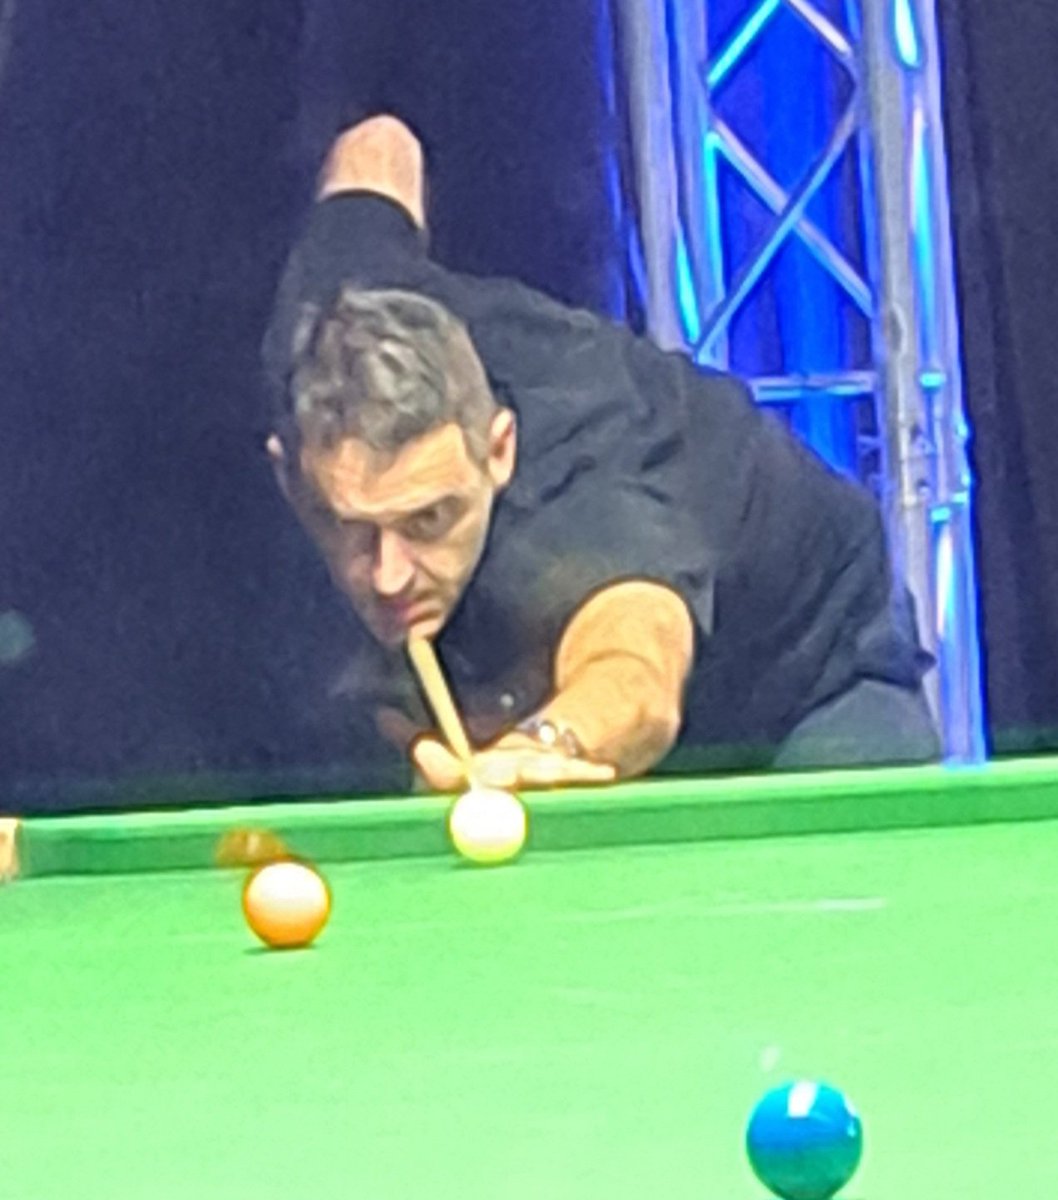 Brilliant afternoon @yorkbarbican for the #UKChampionship watching Luca Brecel win,  and to top it all off, got a glimpse of my No.1  @ronnieo147 on the practice table. #bestsunday